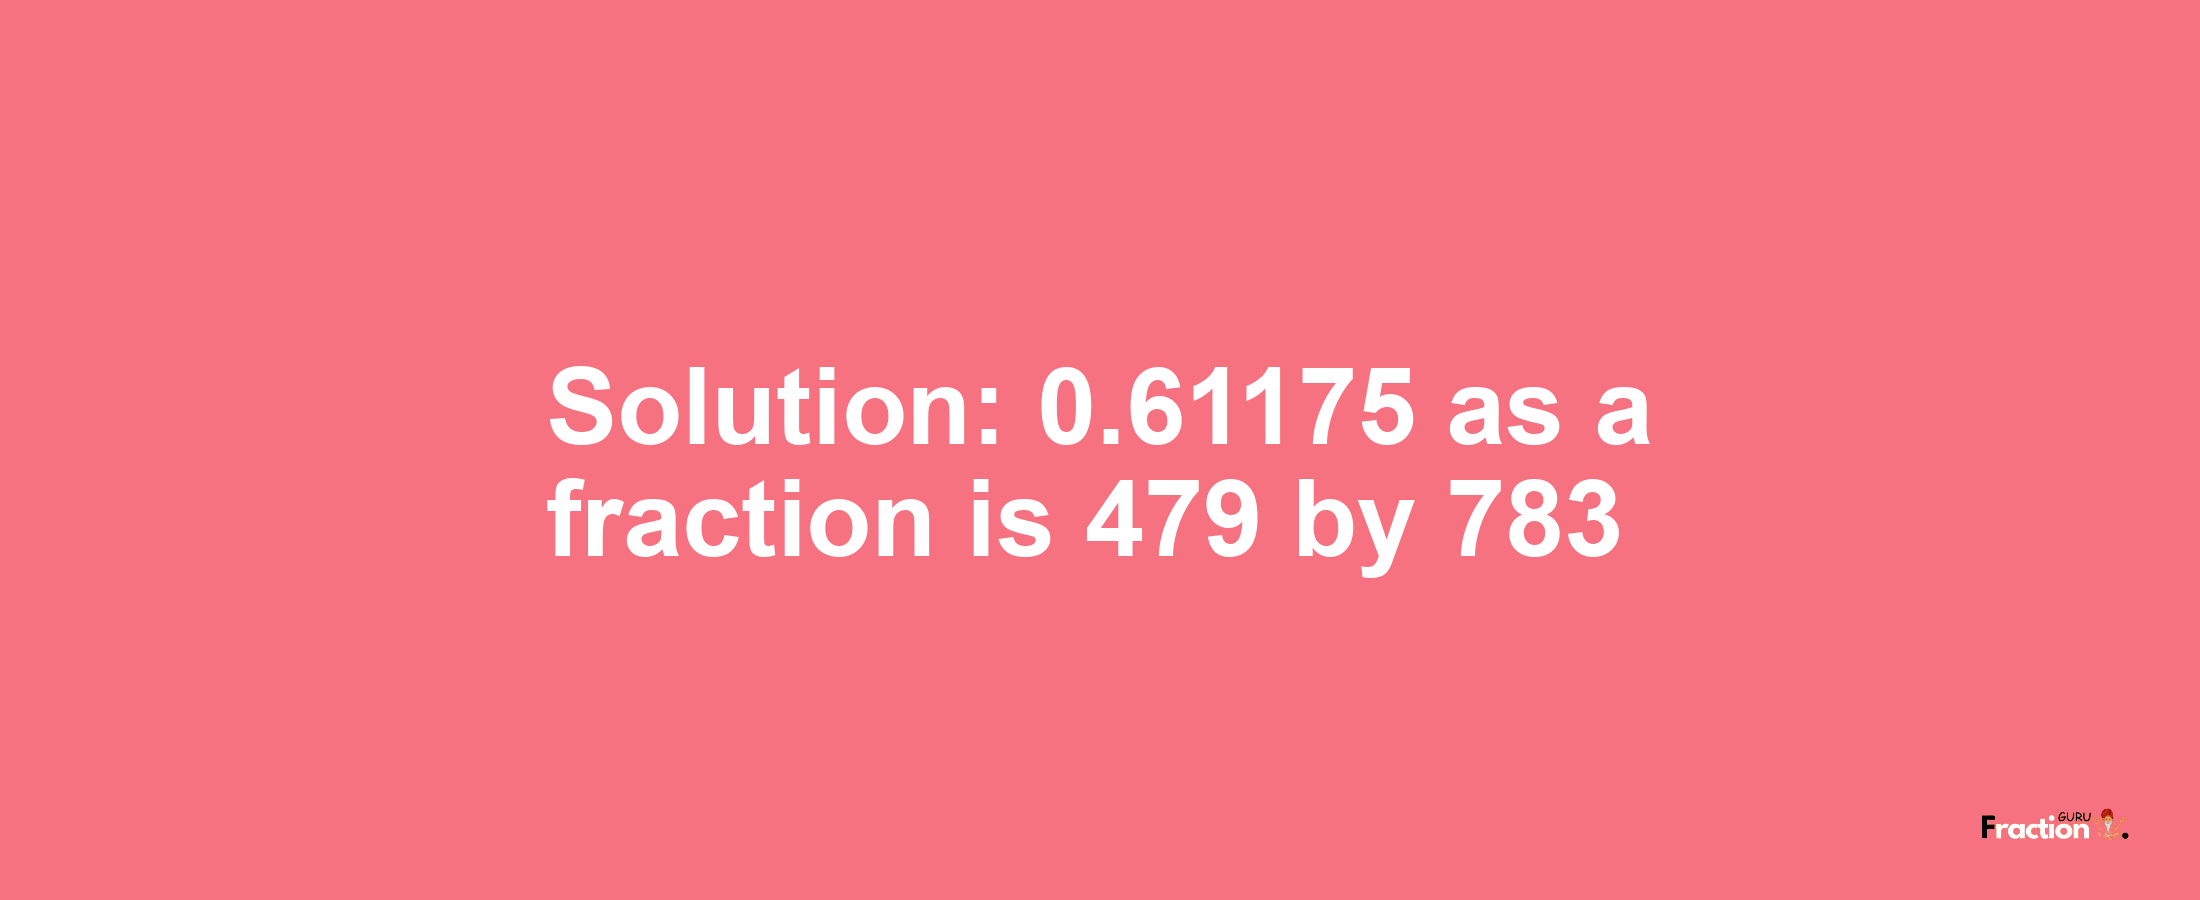 Solution:0.61175 as a fraction is 479/783